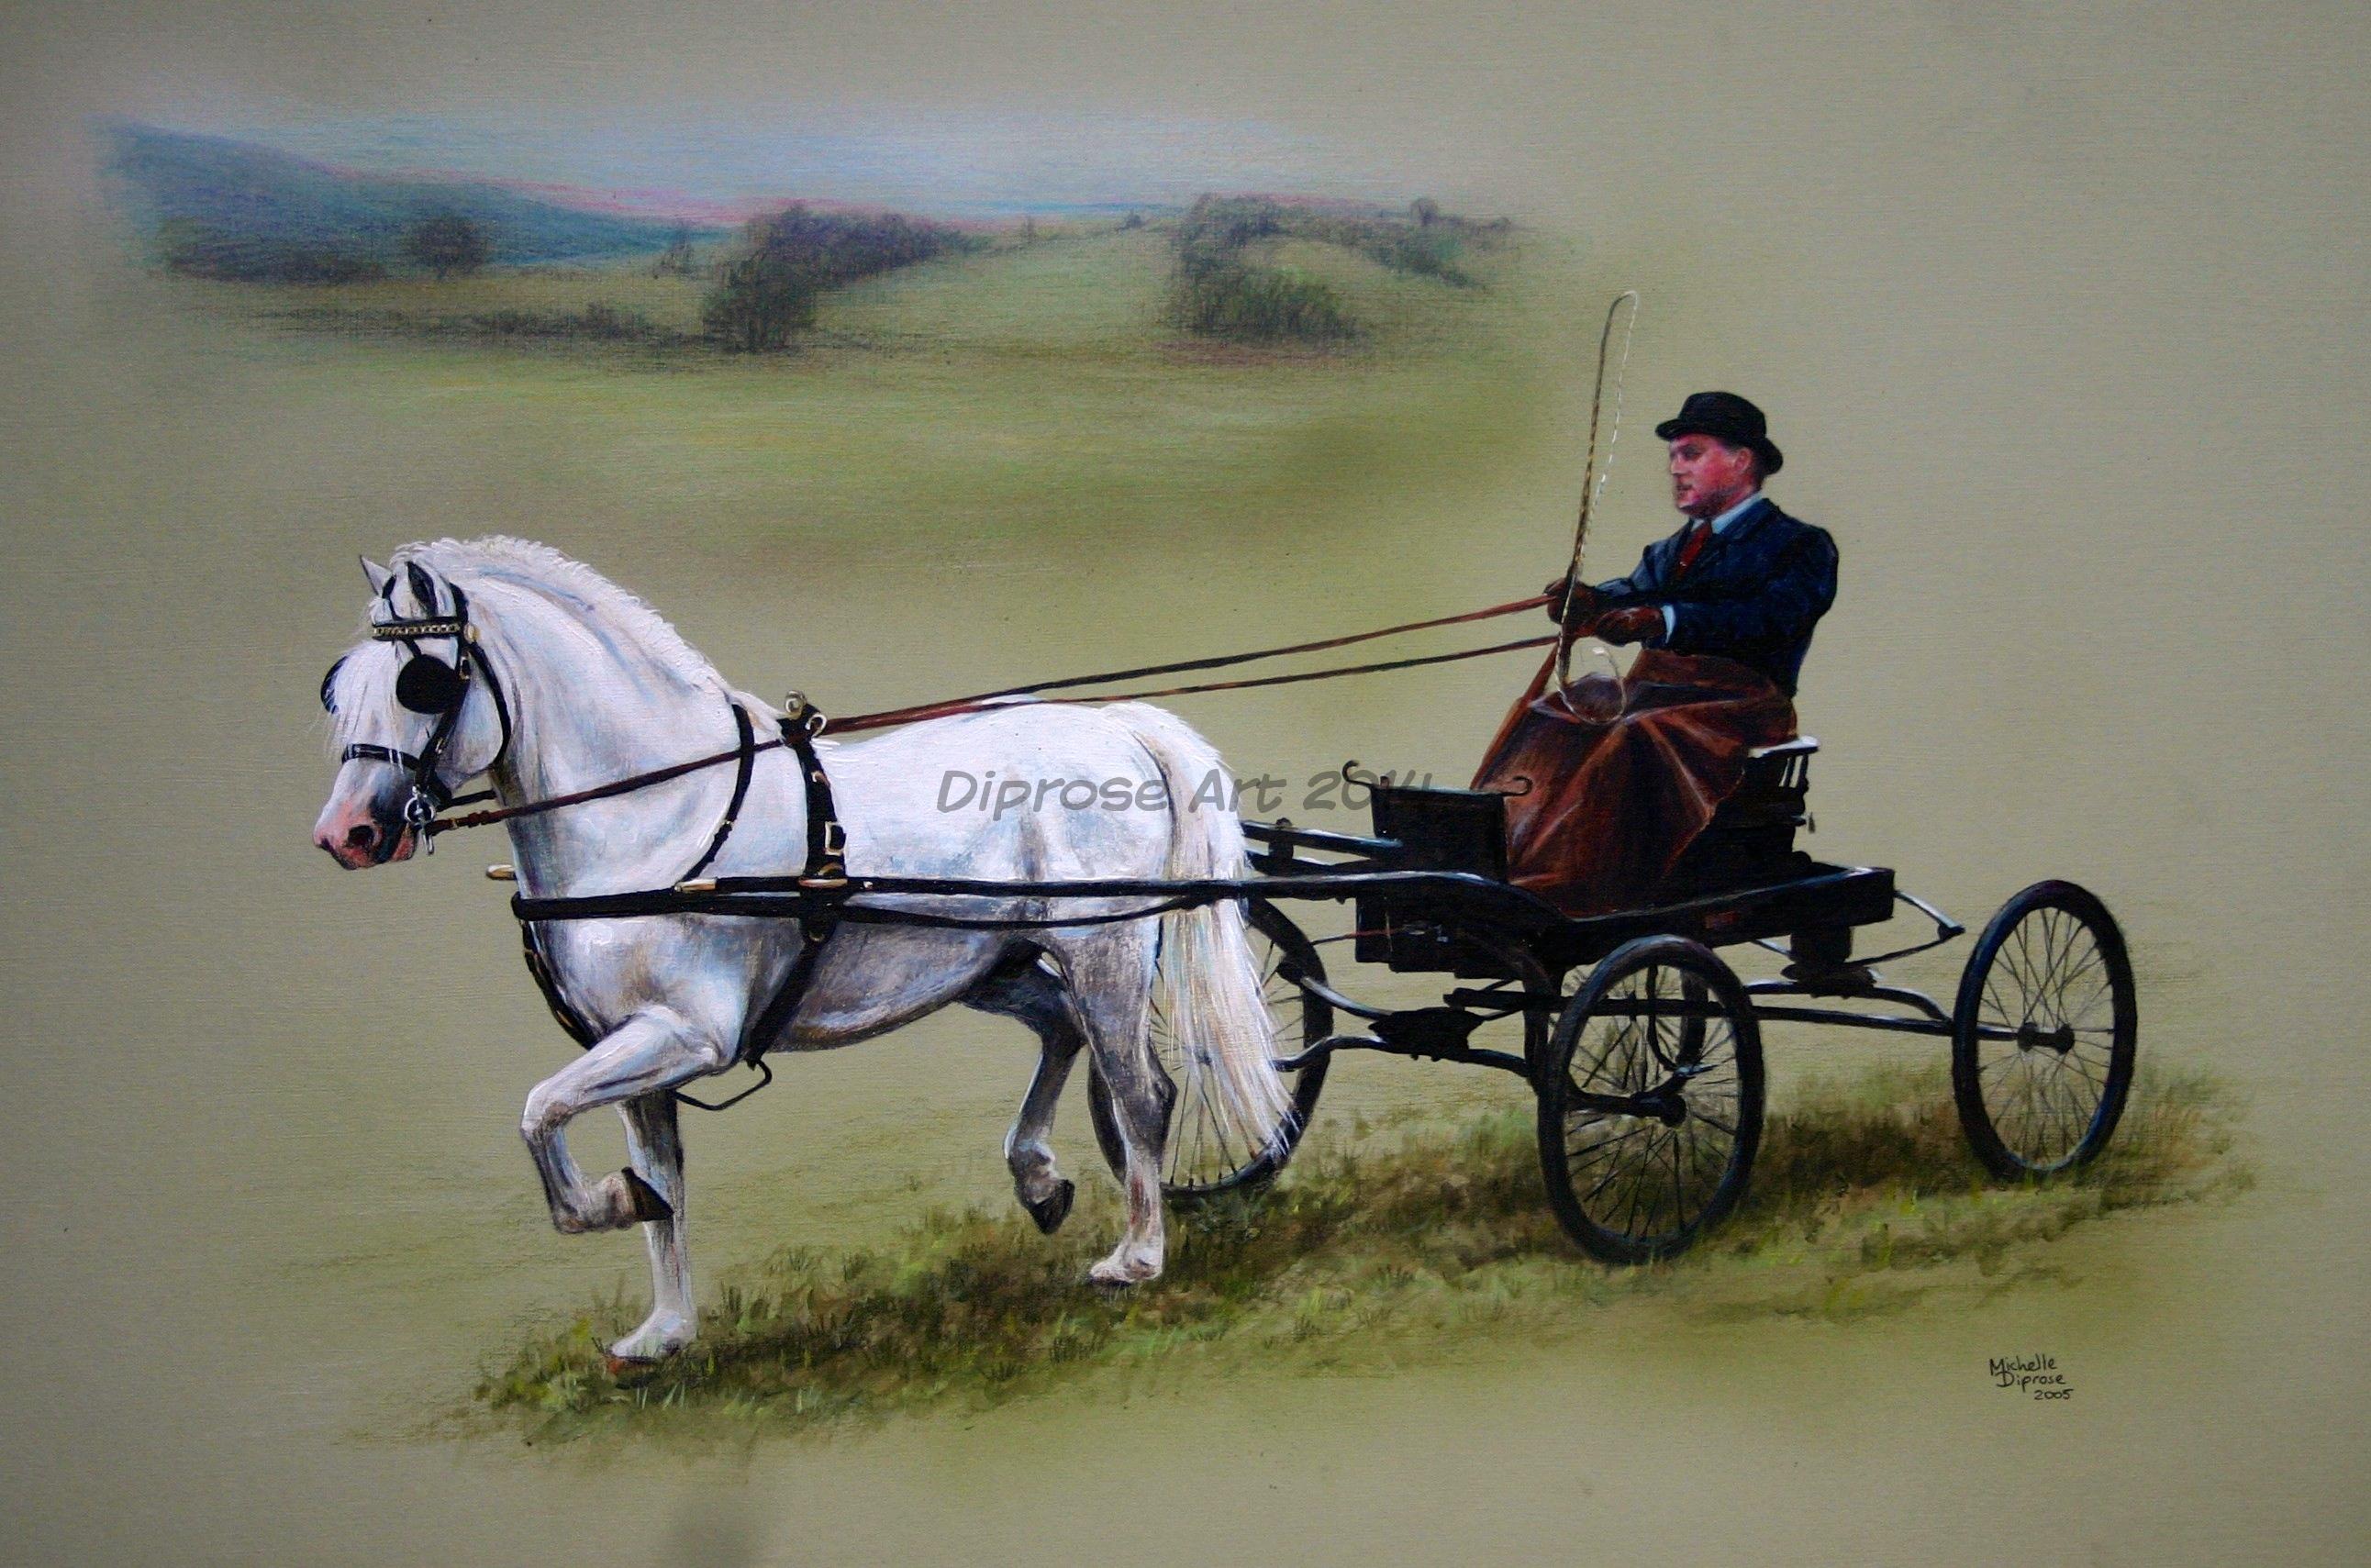 Acrylics on board - approx A3 - horse portrait/ people portraits - Mark is a very skilled driver and won at the Royal Welsh with this bonnie pony.  This Welsh pony was the most flashy and talented I have ever seen.